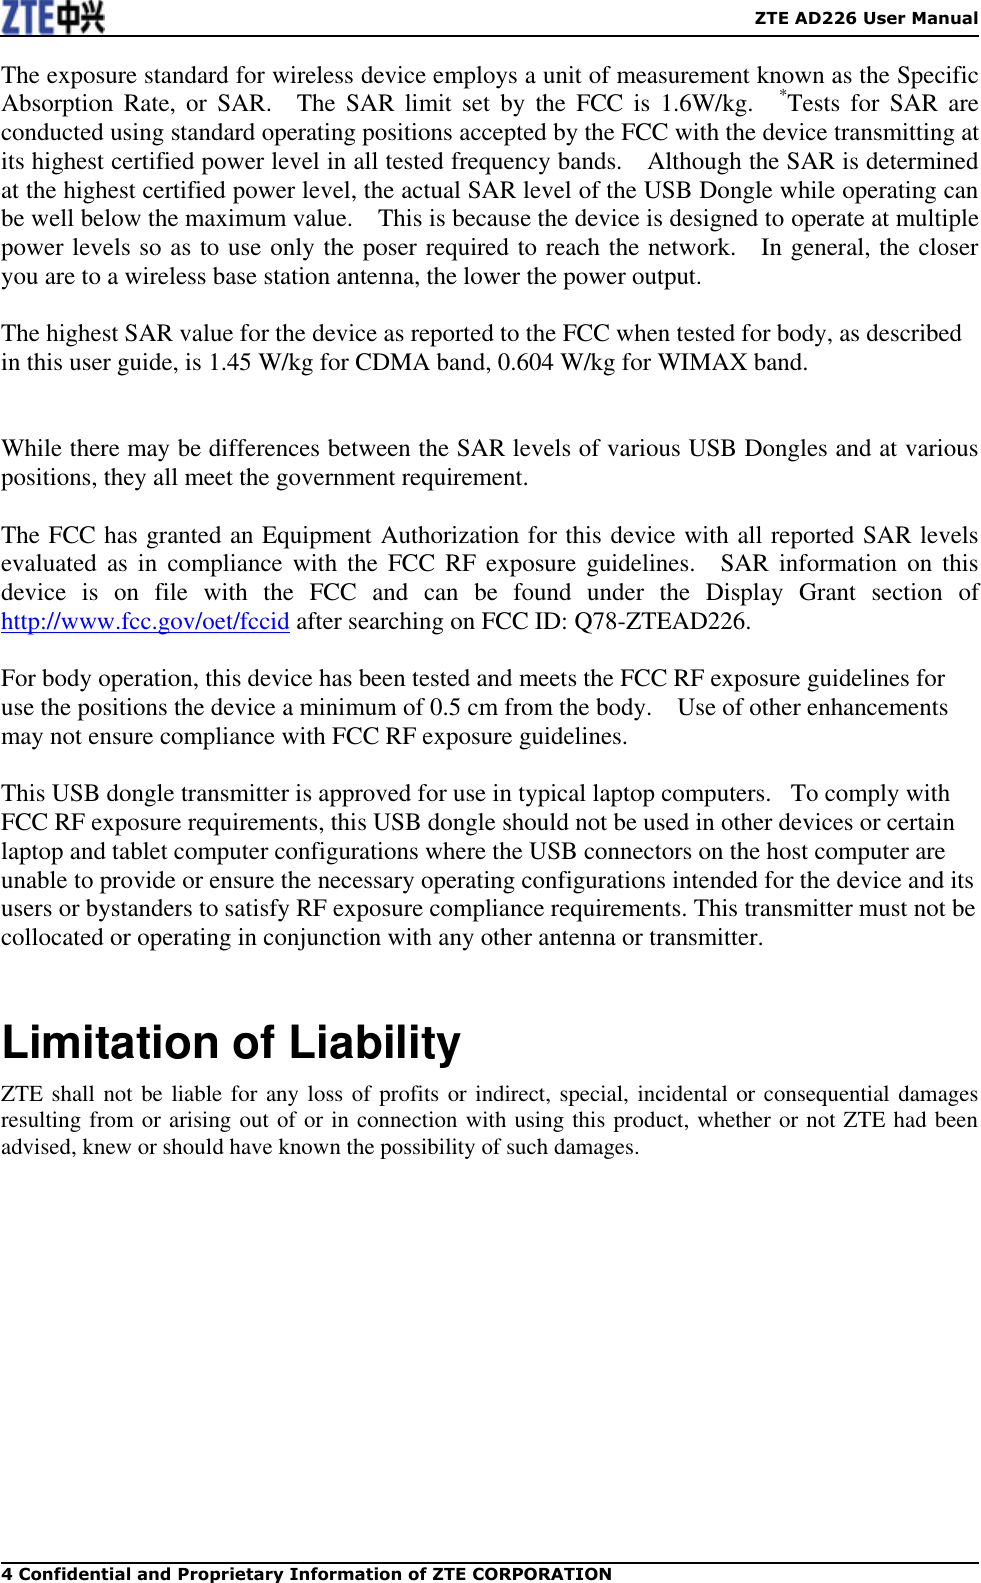    ZTE AD226 User Manual 4 Confidential and Proprietary Information of ZTE CORPORATION The exposure standard for wireless device employs a unit of measurement known as the Specific Absorption  Rate,  or  SAR.    The  SAR  limit  set  by  the  FCC is  1.6W/kg.    *Tests  for SAR  are conducted using standard operating positions accepted by the FCC with the device transmitting at its highest certified power level in all tested frequency bands.    Although the SAR is determined at the highest certified power level, the actual SAR level of the USB Dongle while operating can be well below the maximum value.    This is because the device is designed to operate at multiple power levels so as to use only the poser required to reach the network.    In general, the closer you are to a wireless base station antenna, the lower the power output.  The highest SAR value for the device as reported to the FCC when tested for body, as described in this user guide, is 1.45 W/kg for CDMA band, 0.604 W/kg for WIMAX band.     While there may be differences between the SAR levels of various USB Dongles and at various positions, they all meet the government requirement.  The FCC has granted an Equipment Authorization for this device with all reported SAR levels evaluated  as  in compliance  with the  FCC  RF exposure  guidelines.    SAR information  on this device  is  on  file  with  the  FCC  and  can  be  found  under  the  Display  Grant  section  of http://www.fcc.gov/oet/fccid after searching on FCC ID: Q78-ZTEAD226.  For body operation, this device has been tested and meets the FCC RF exposure guidelines for use the positions the device a minimum of 0.5 cm from the body.    Use of other enhancements may not ensure compliance with FCC RF exposure guidelines.  This USB dongle transmitter is approved for use in typical laptop computers.   To comply with FCC RF exposure requirements, this USB dongle should not be used in other devices or certain laptop and tablet computer configurations where the USB connectors on the host computer are unable to provide or ensure the necessary operating configurations intended for the device and its users or bystanders to satisfy RF exposure compliance requirements. This transmitter must not be collocated or operating in conjunction with any other antenna or transmitter.  Limitation of Liability ZTE shall not be liable for any loss of profits or indirect, special, incidental or consequential damages resulting from or arising out of or in connection with using this product, whether or not ZTE had been advised, knew or should have known the possibility of such damages. 